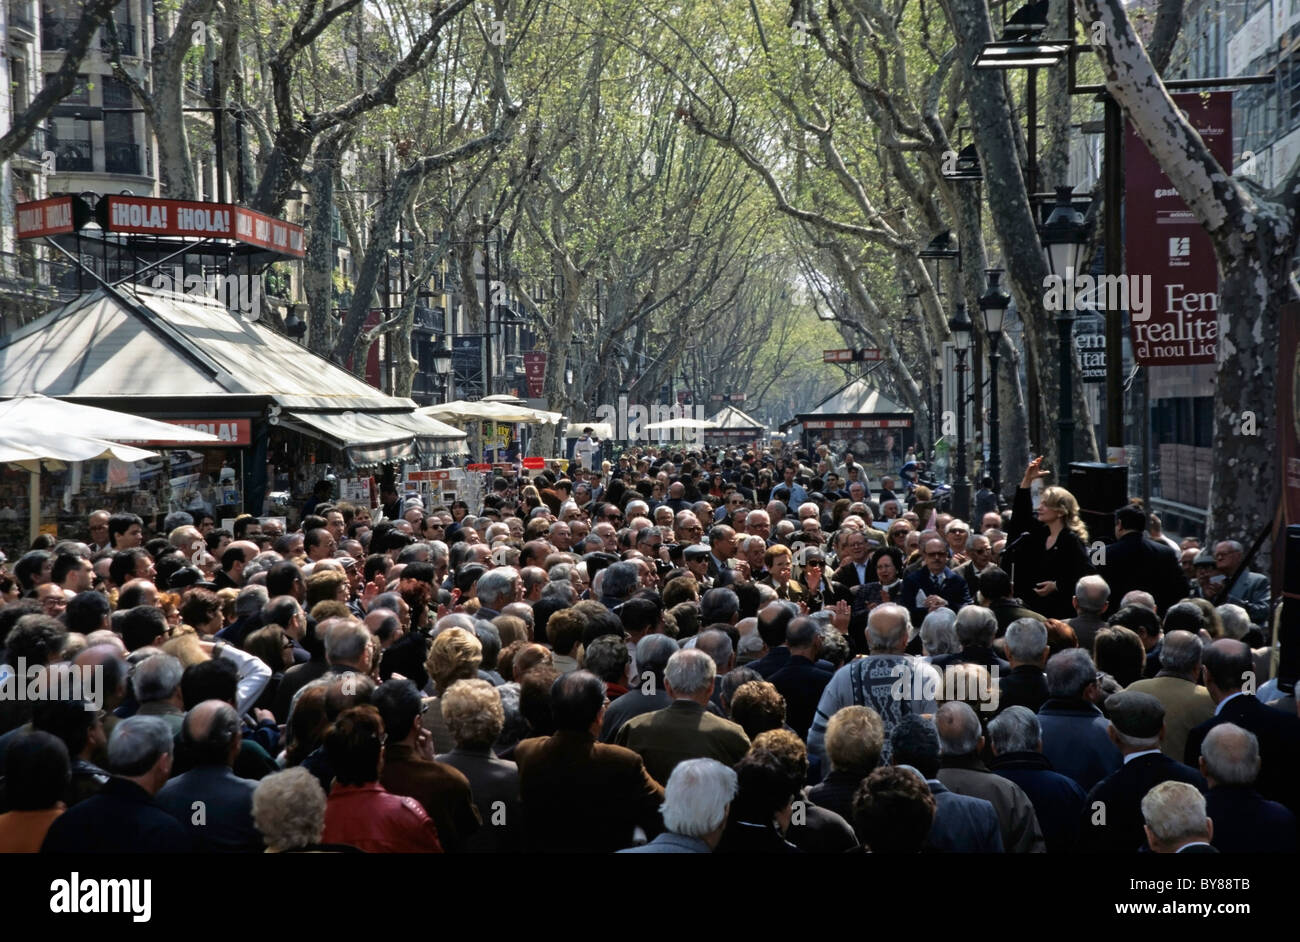 Crowds in La Rambla, an iconic and busy street in Barcelona, Spain. Stock Photo